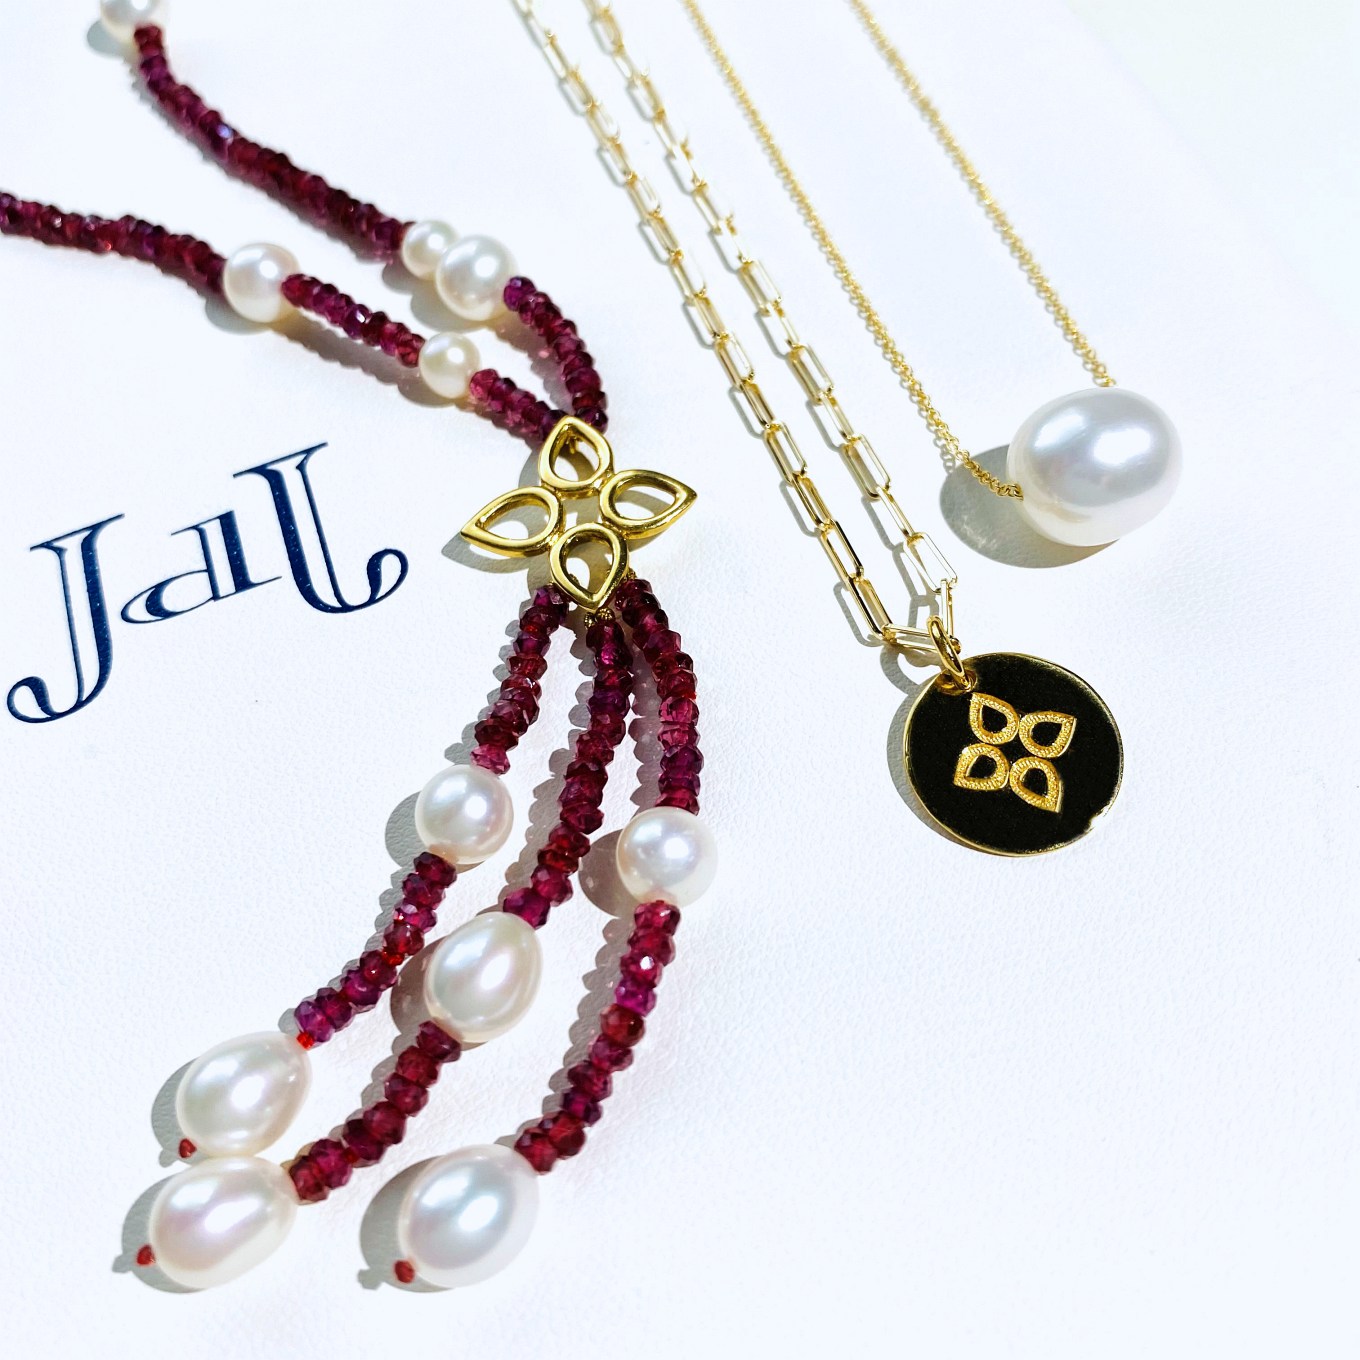 RHODOLITE & FRESHWATER PEARL NECKLACE 2900 - LOVE DISC PENDANT 595 ( CHAIN SOLD SEPERATELY ) IN YELLOW GOLD - FRESHWATER PEARL FLOAT PENDANT 695